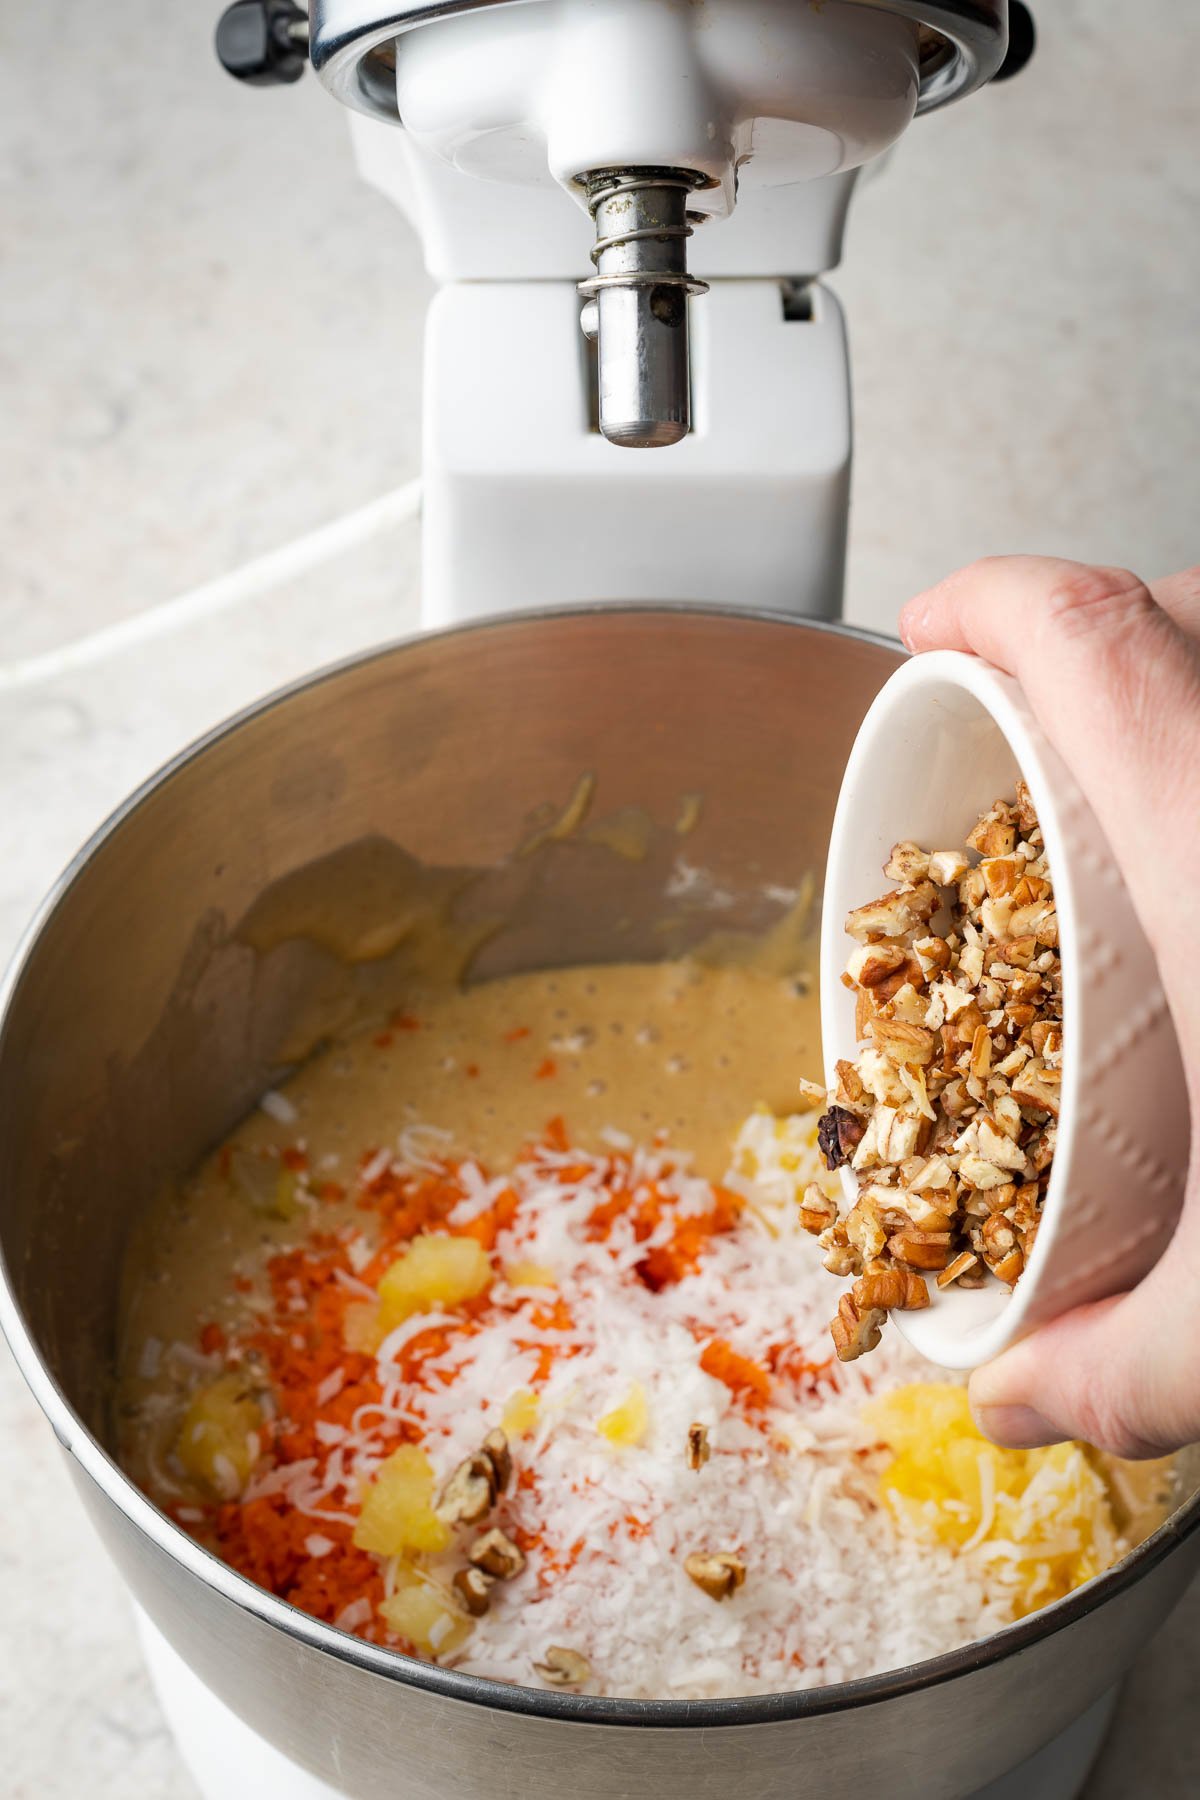 Pouring pineapple, carrots, coconut, and walnuts into cake batter.